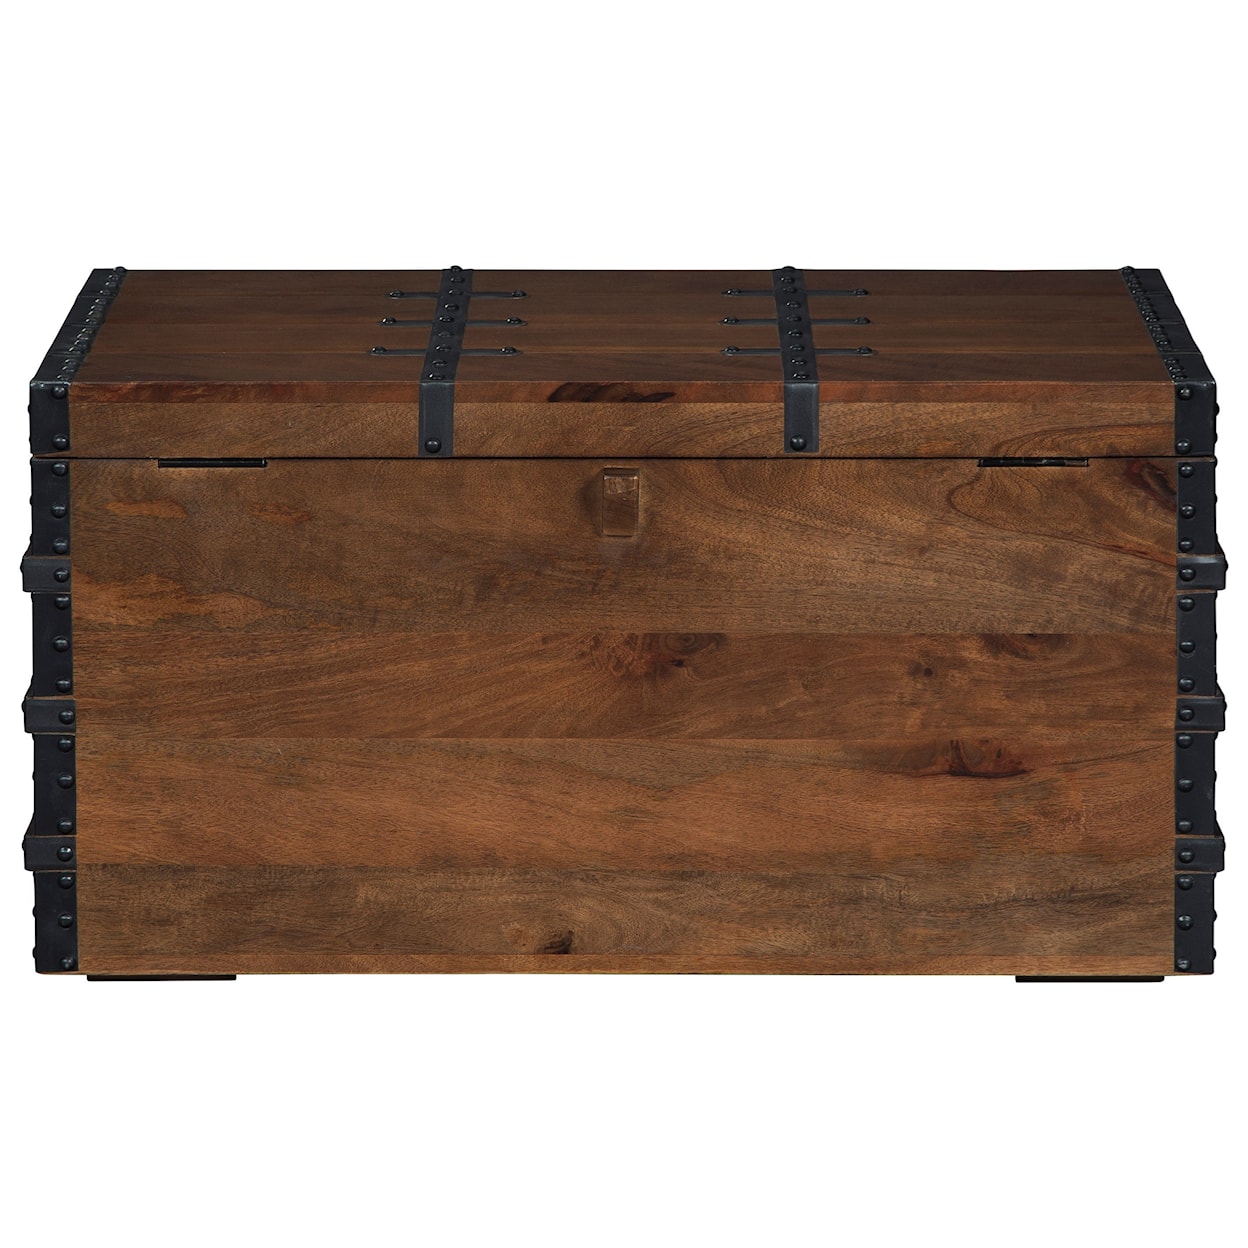 Signature Design by Ashley Furniture Kettleby Storage Trunk